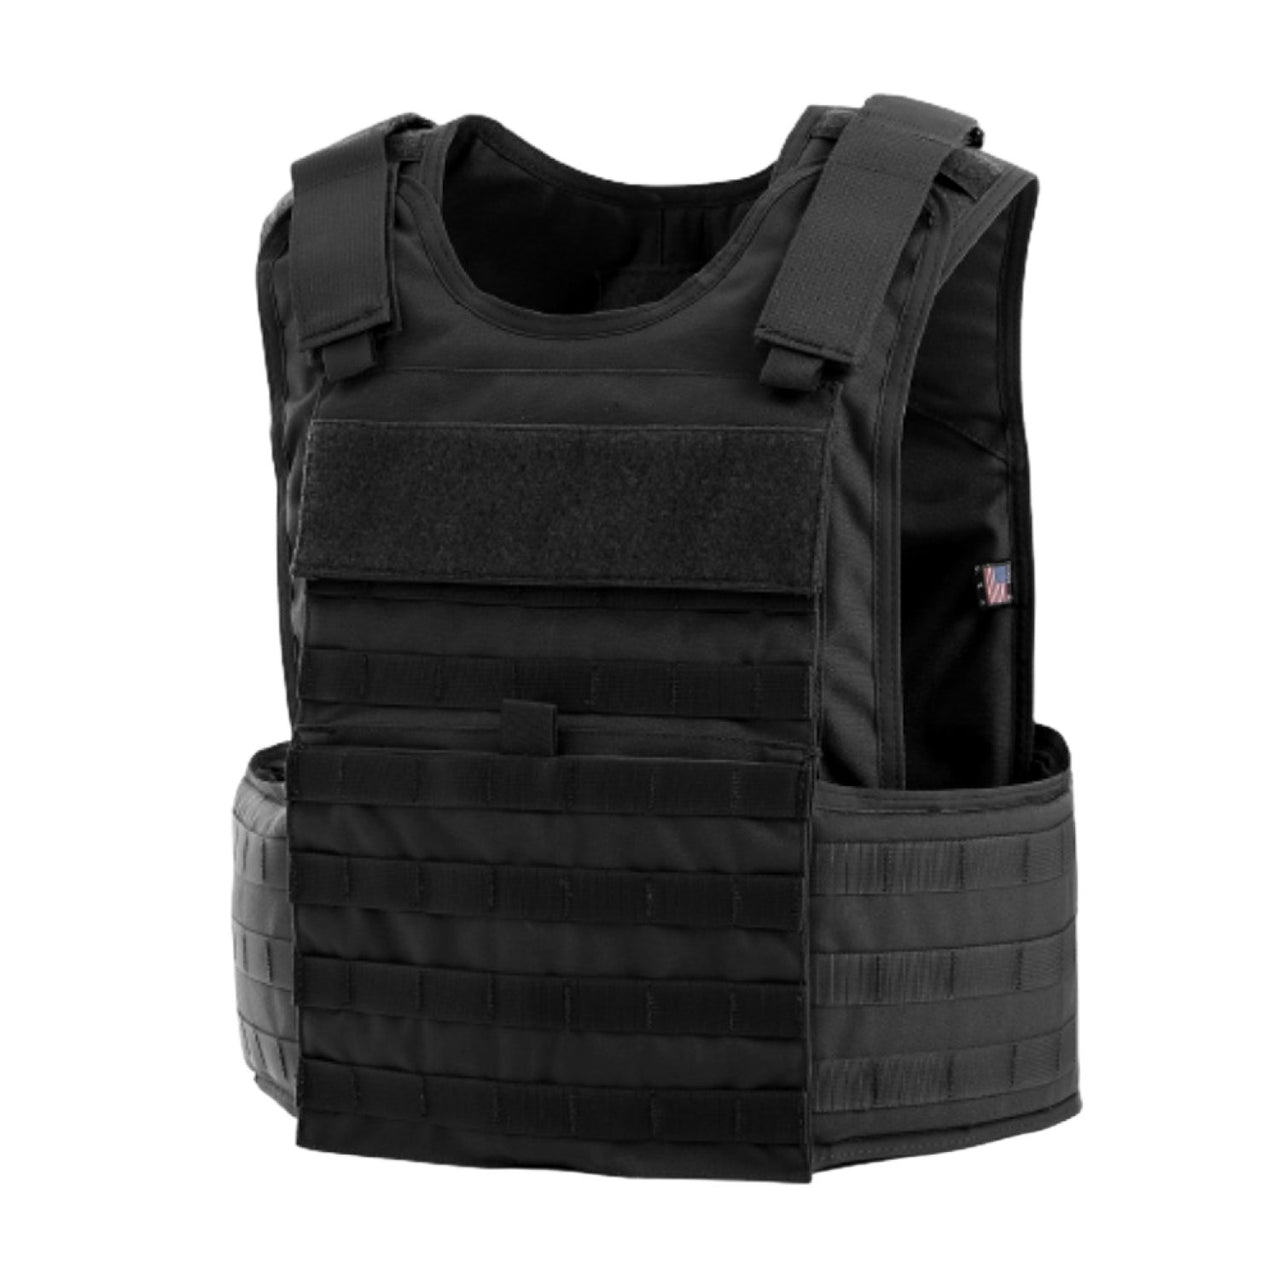 Black multi-threat body armor vest with Level IIIA ballistics, adjustable shoulder straps, and front velcro panel, isolated on a white background. (Brand Name: Body Armor Direct)